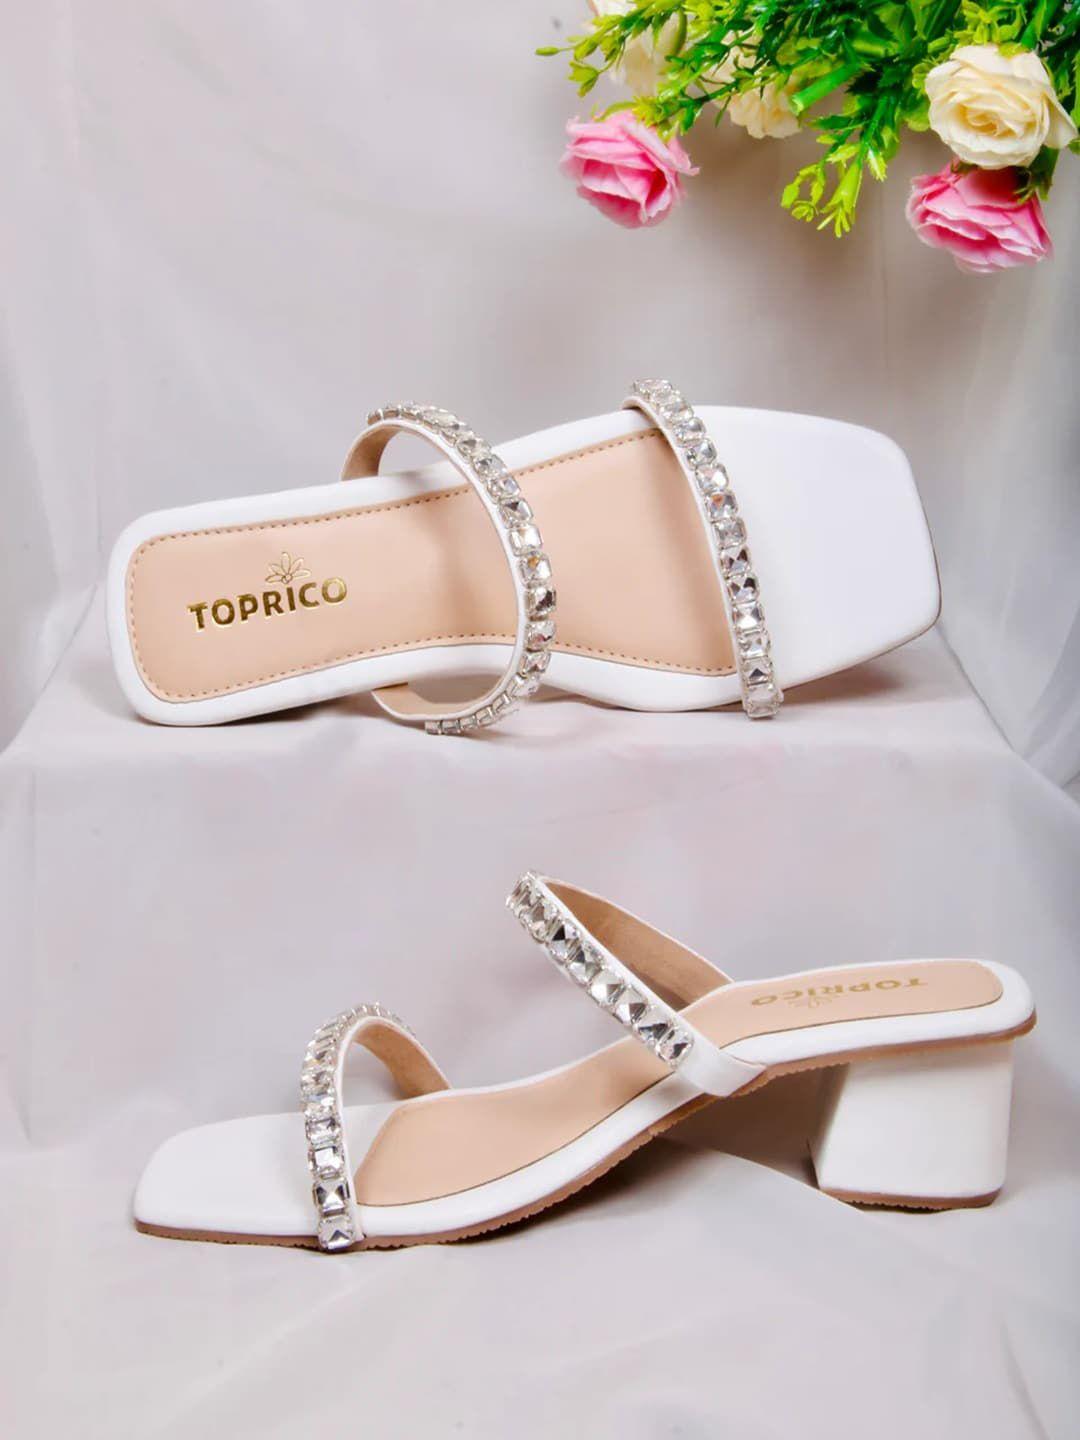 toprico two strap emebllished party block heels